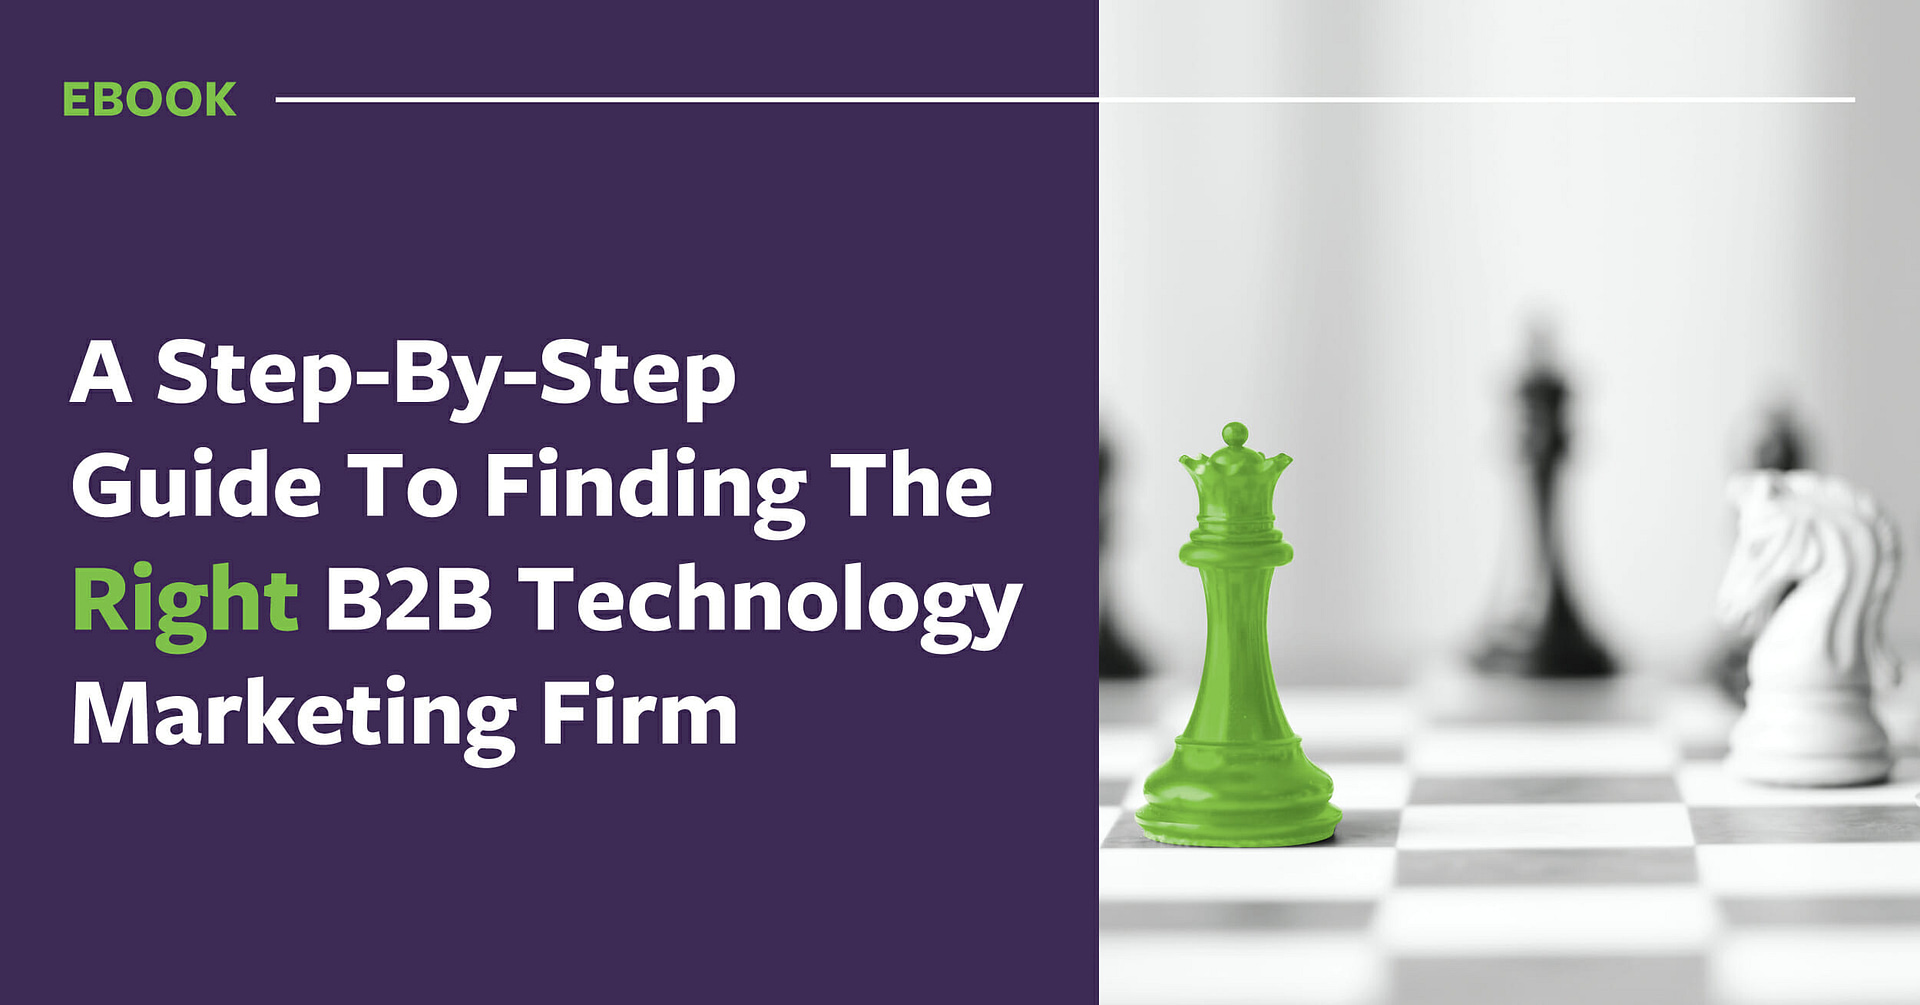 [eBook] A Step-By-Step Guide To Finding The Right B2B Technology Marketing Firm